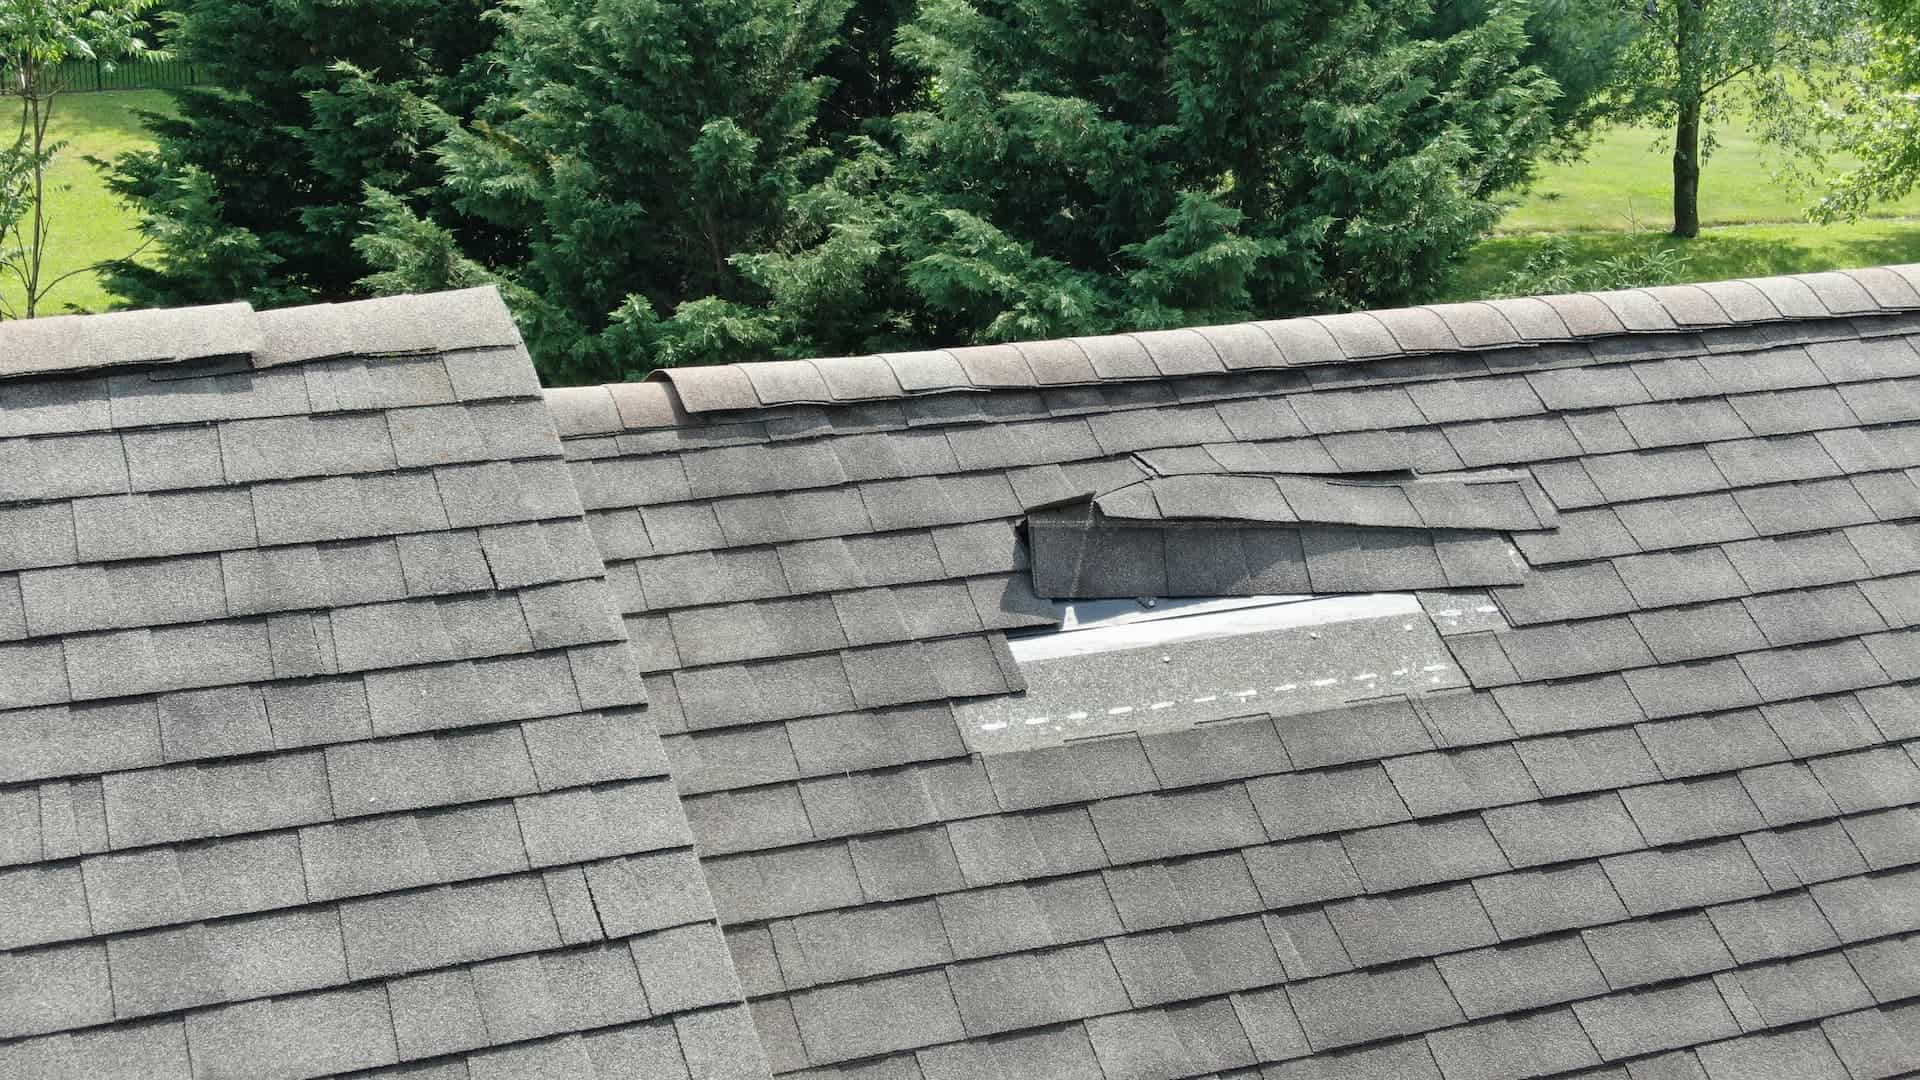 How To Repair Shingles On A Roof